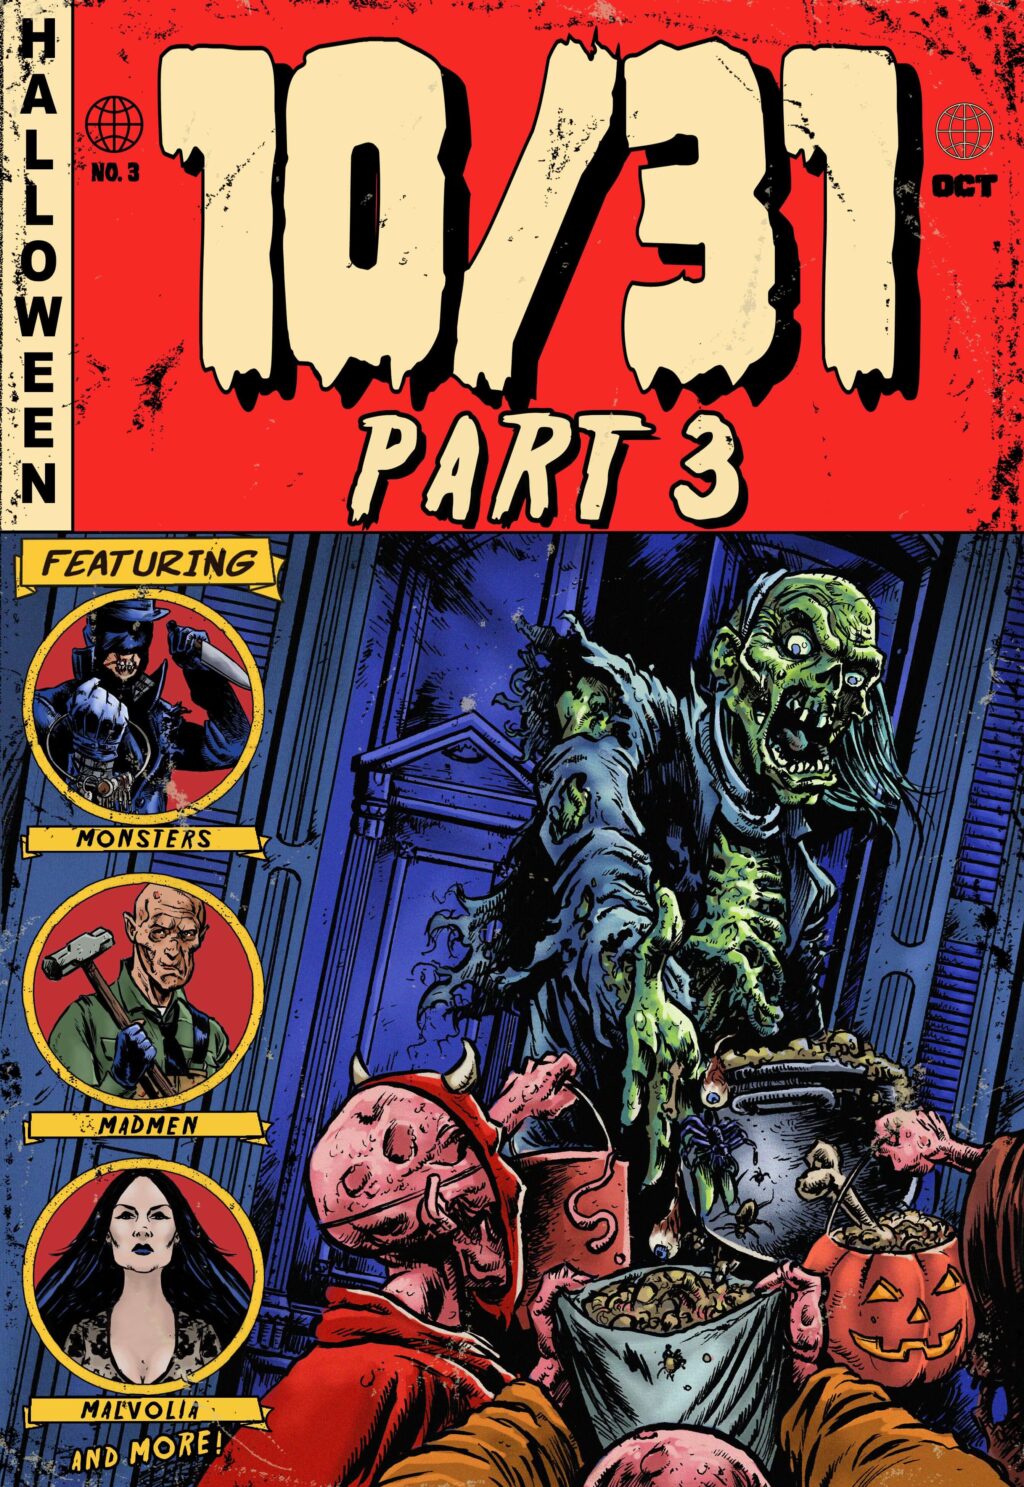 10 31 Part 3 Poster 1 1024x1487 - PJ Starks Discusses 'The Barn Part II', 'Cryptids' and More [Exclusive]